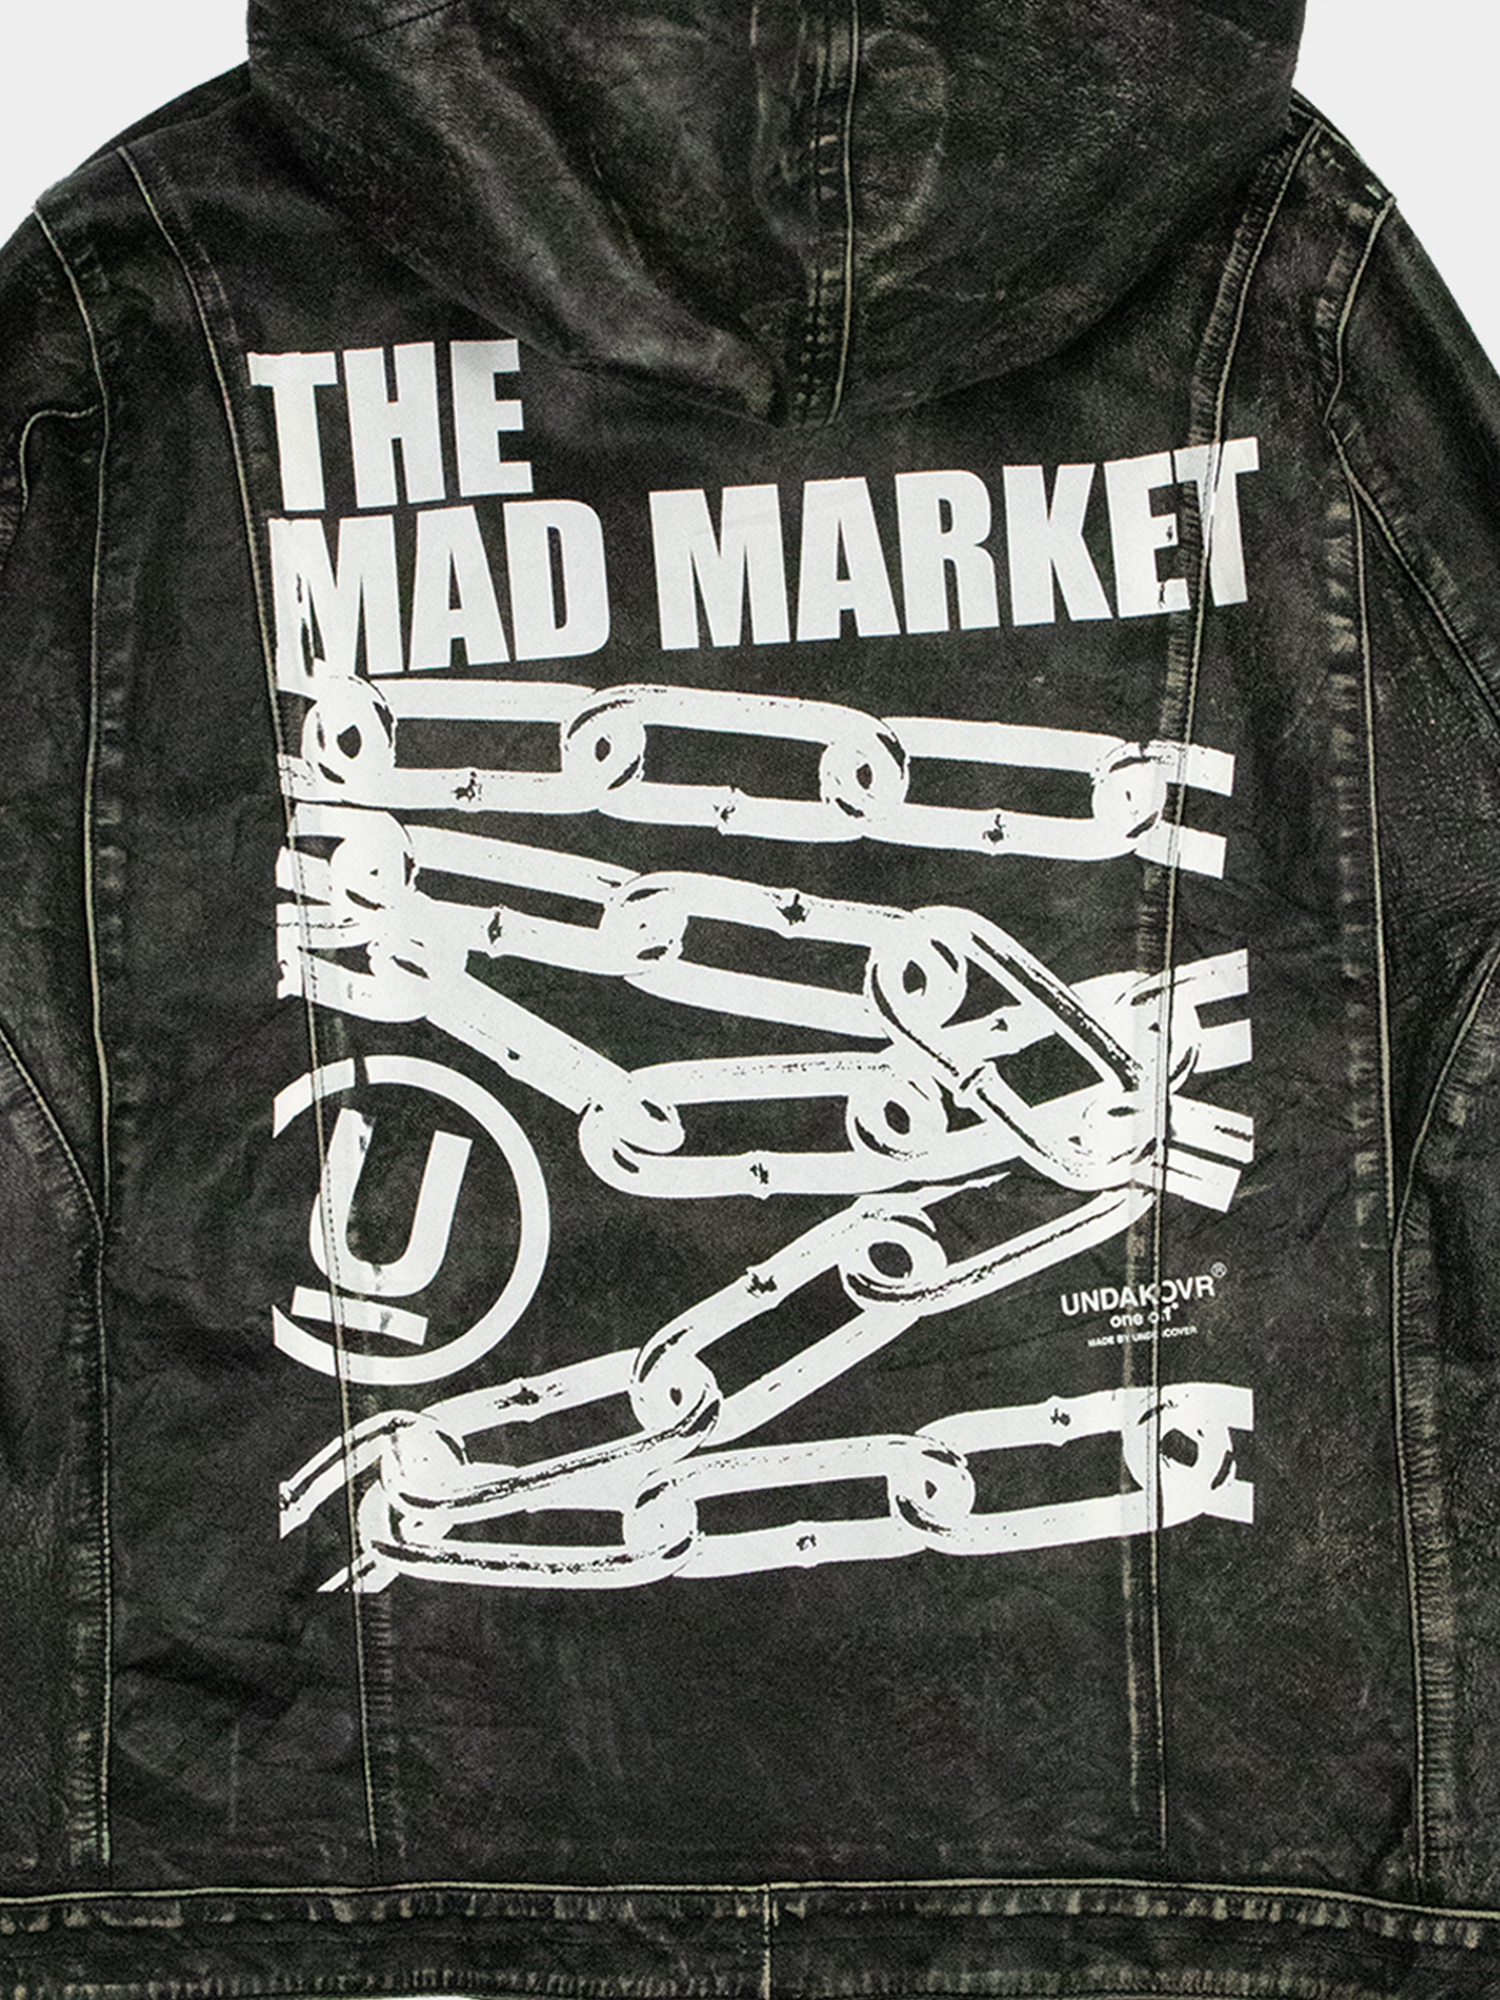 UNDE限定1点物 UNDER COVER THE MAD MARKET  パーカー